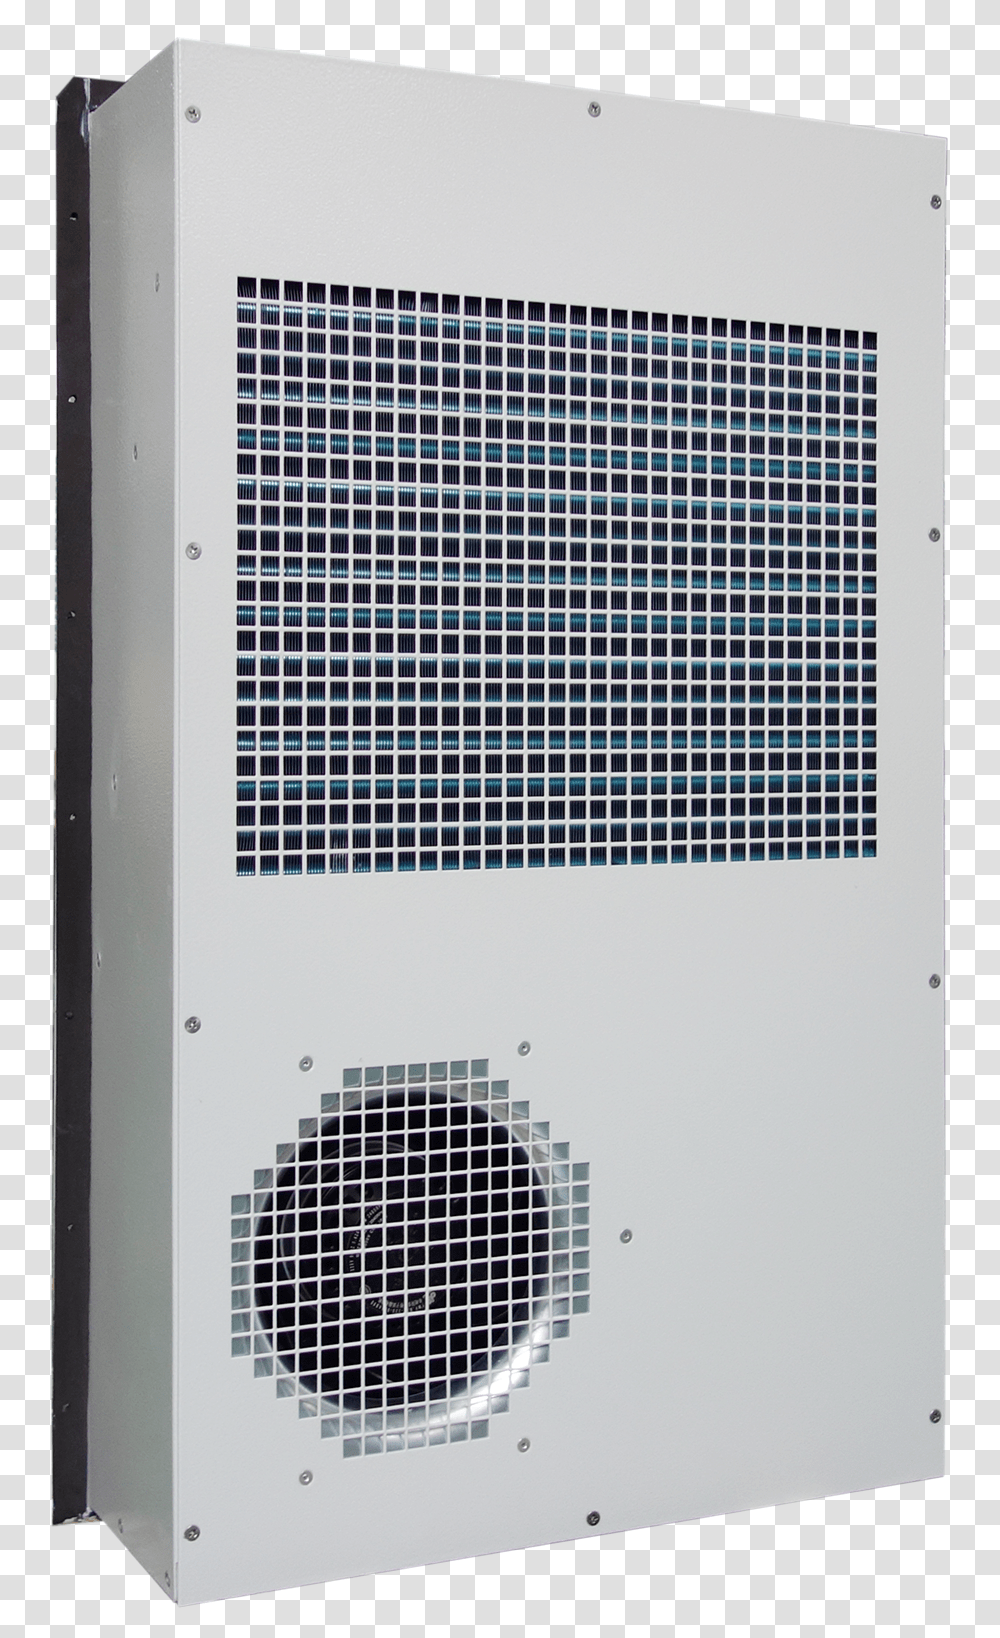 Special Price For China Telecom Air Conditioner Mesh, Appliance, Electronics, Computer, Amplifier Transparent Png